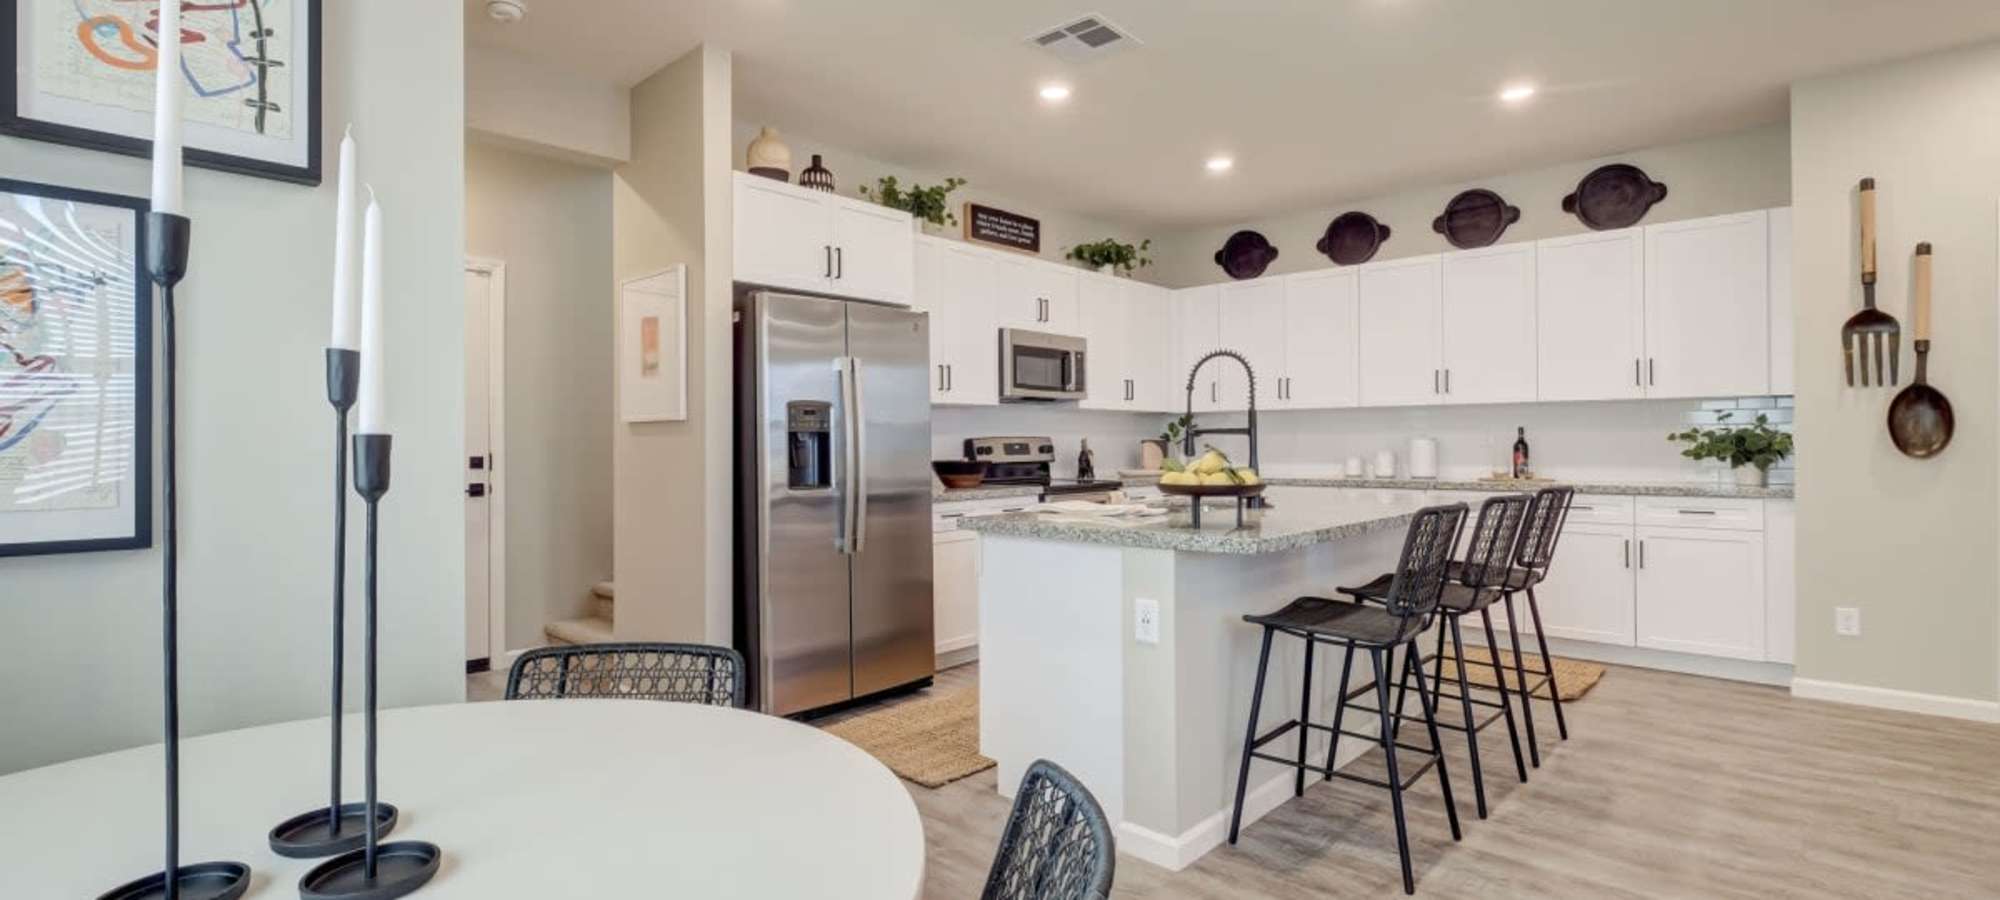 Schedule a Tour at BB Living at Trails Edge in Centennial, Colorado